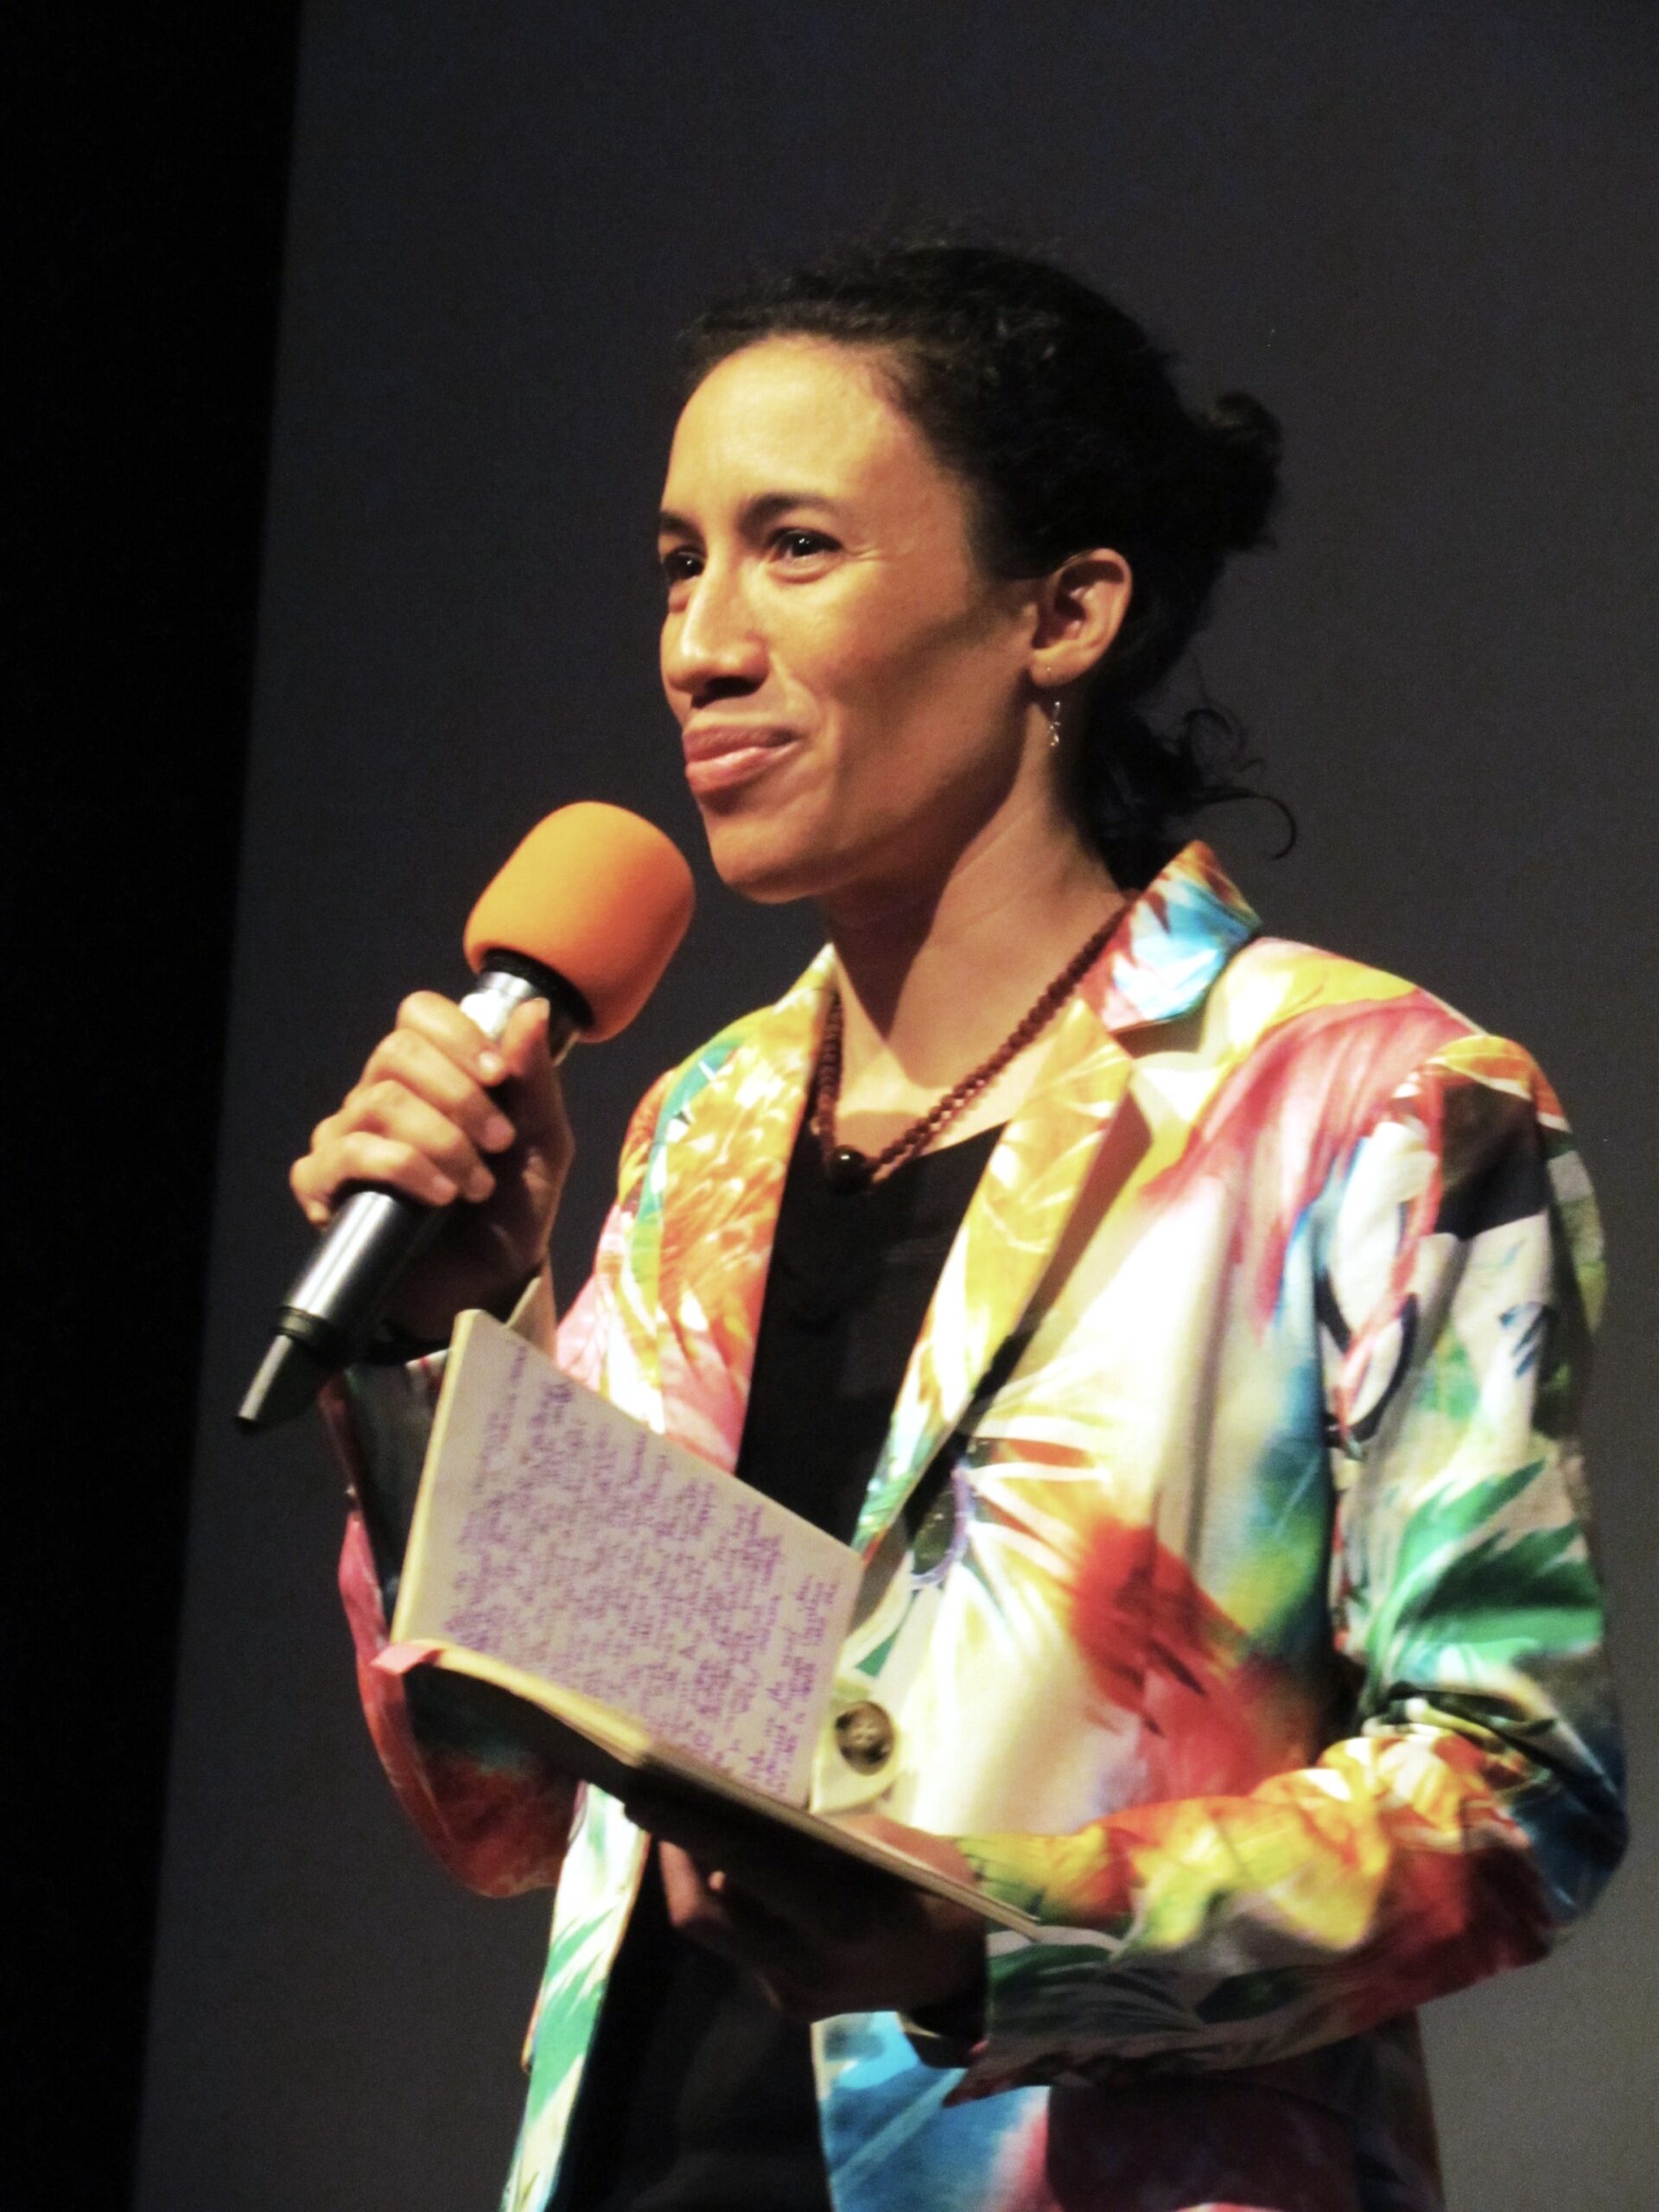 Layla Zami gives a speech holding a microphone in one hand and a notebook in another. She is wearing a colorful blazer with parrots printed on it